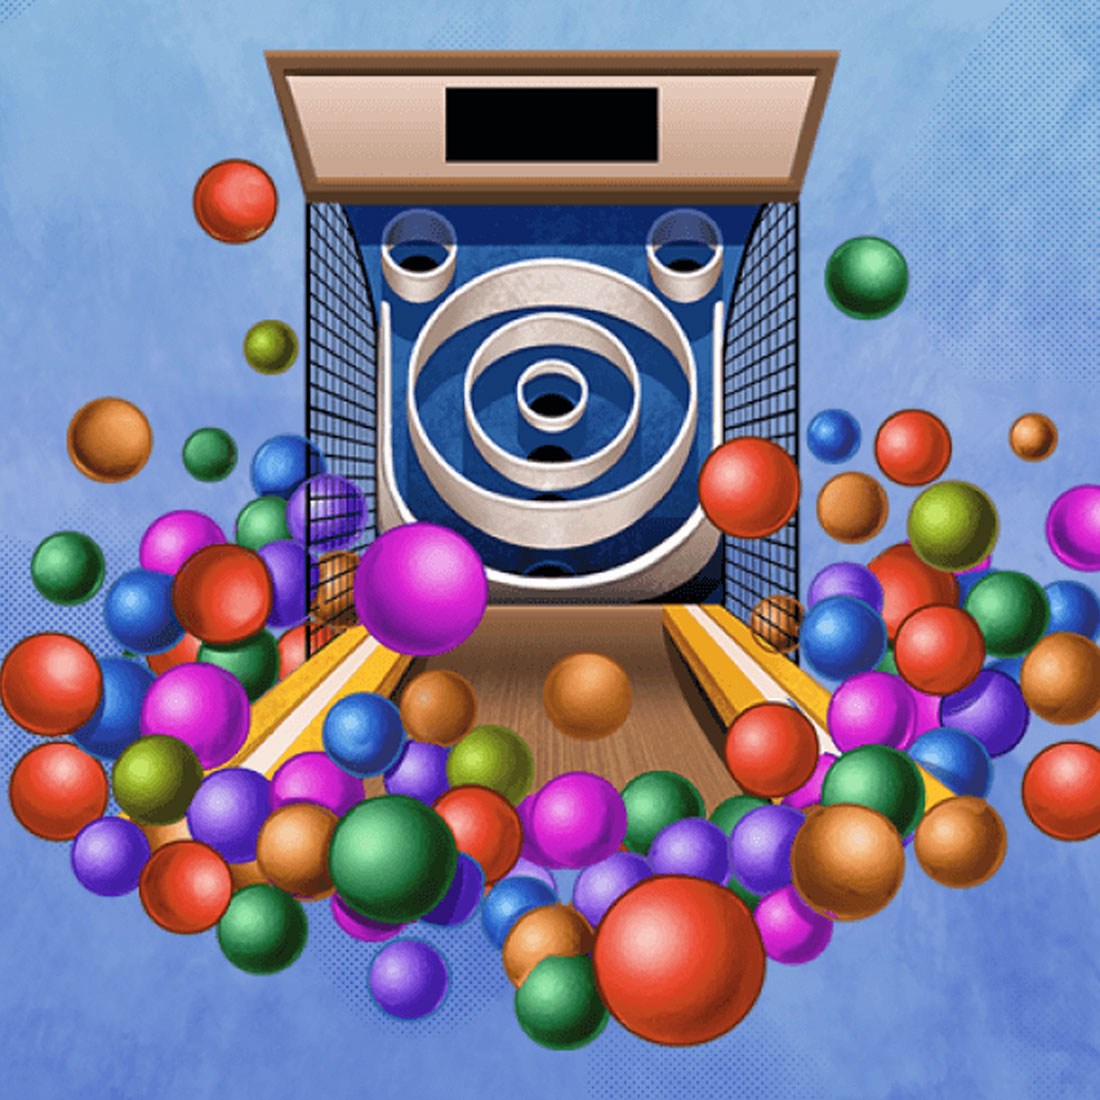 An illustration of various colored balls in front of an arcade game